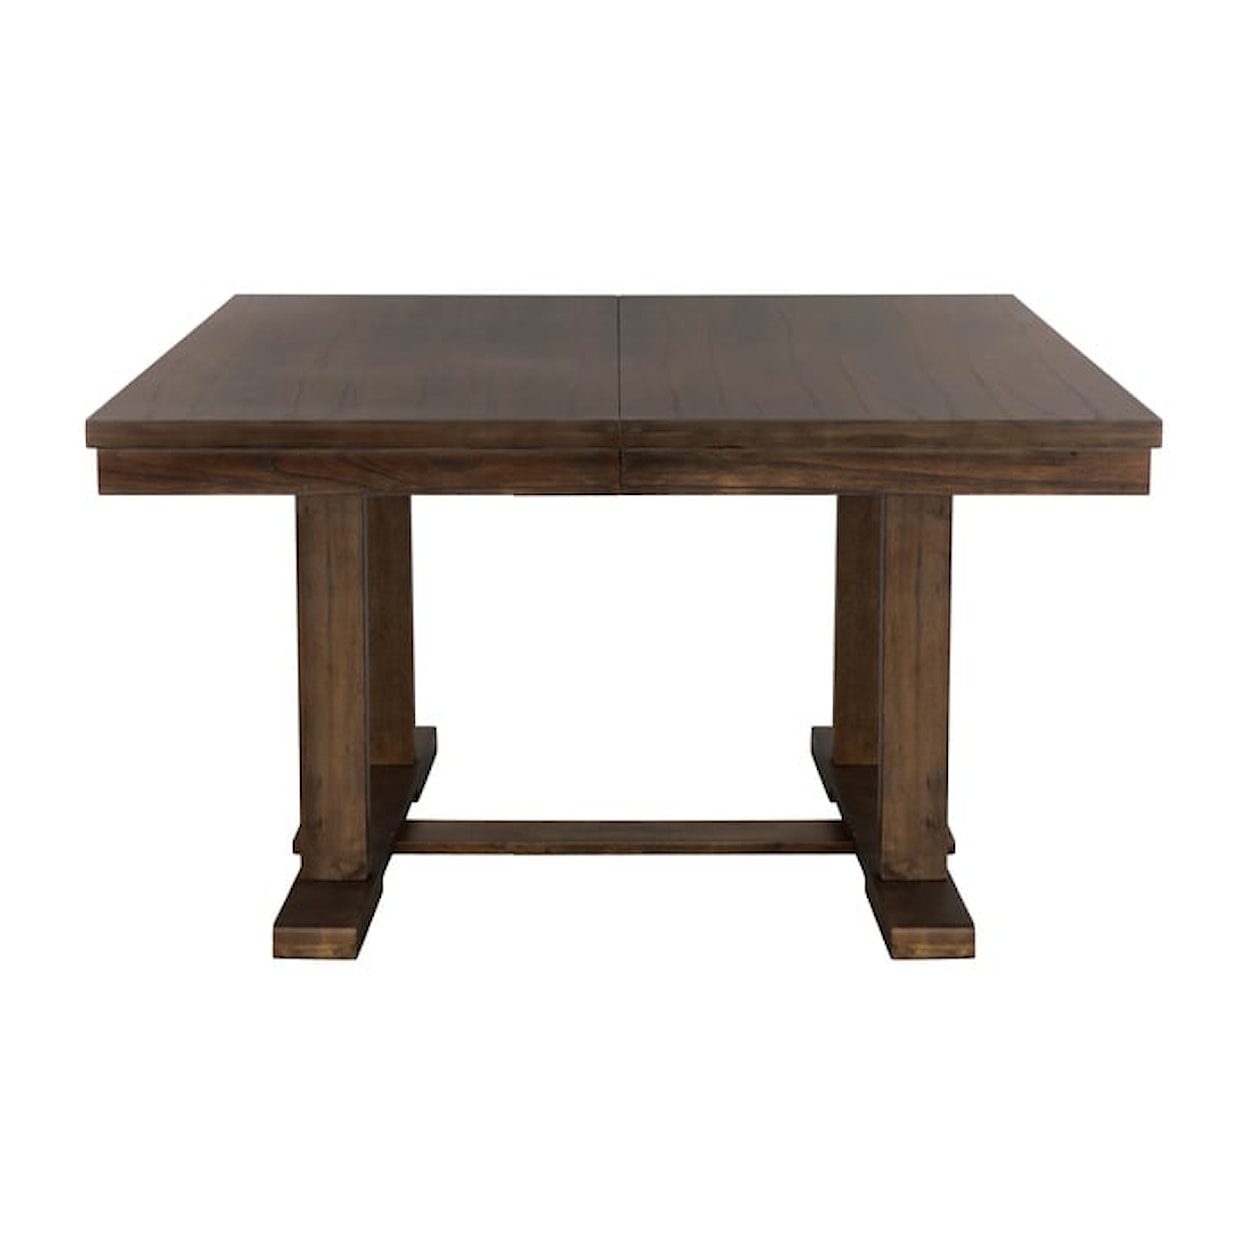 Homelegance Wieland Dining Table